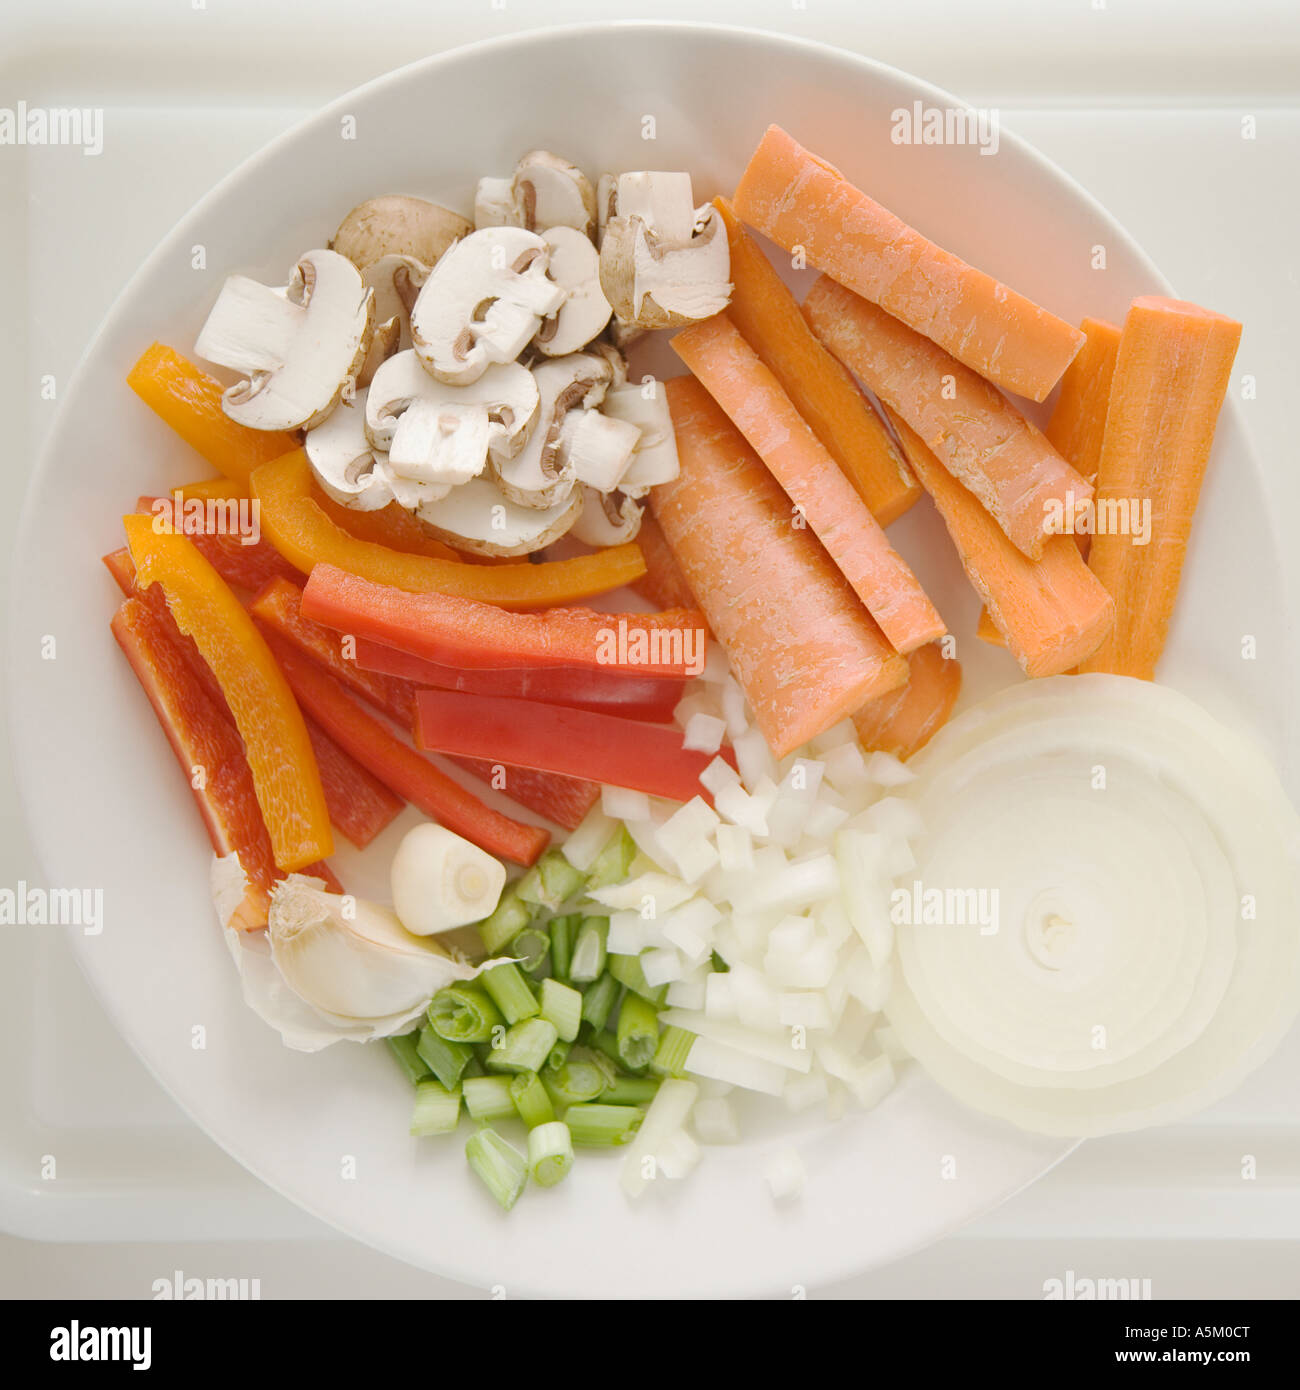 Chopped vegetables on plate Stock Photo